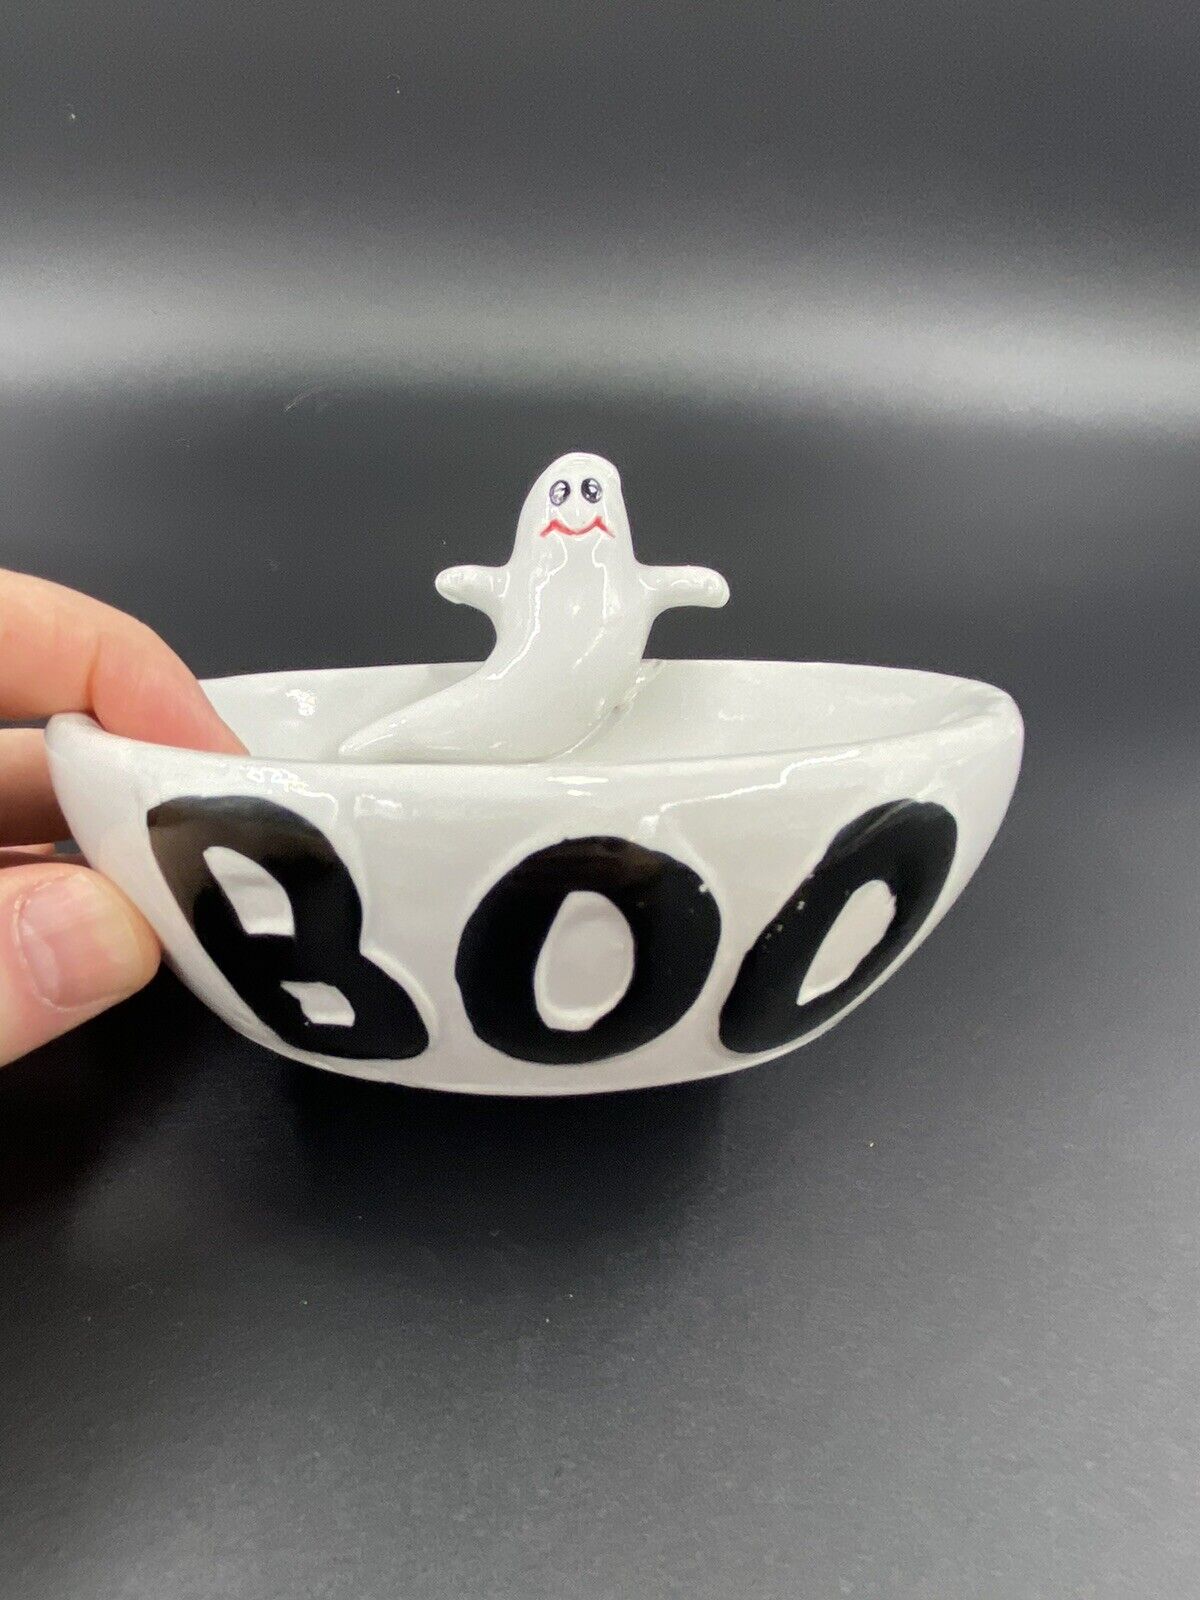 Vintage 1996 Ghost Boo - Candy Trinket Jewelry Vanity Decor Dish Tray